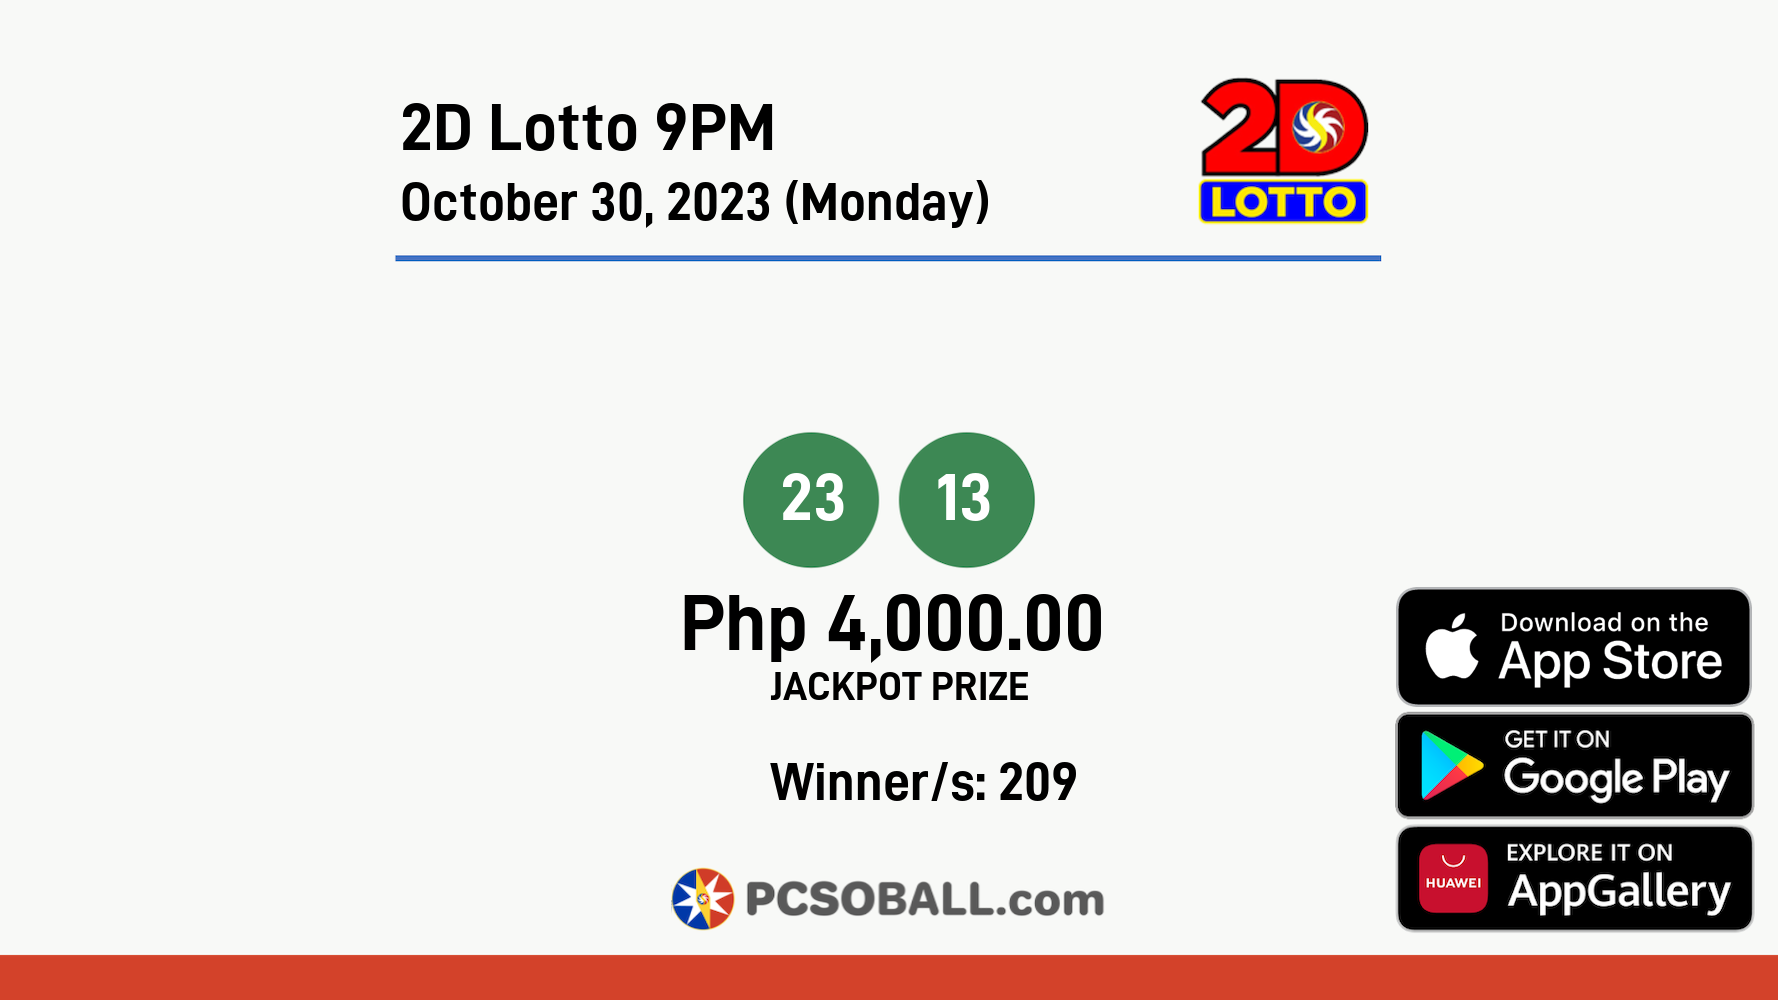 2D Lotto 9PM October 30, 2023 (Monday) Result